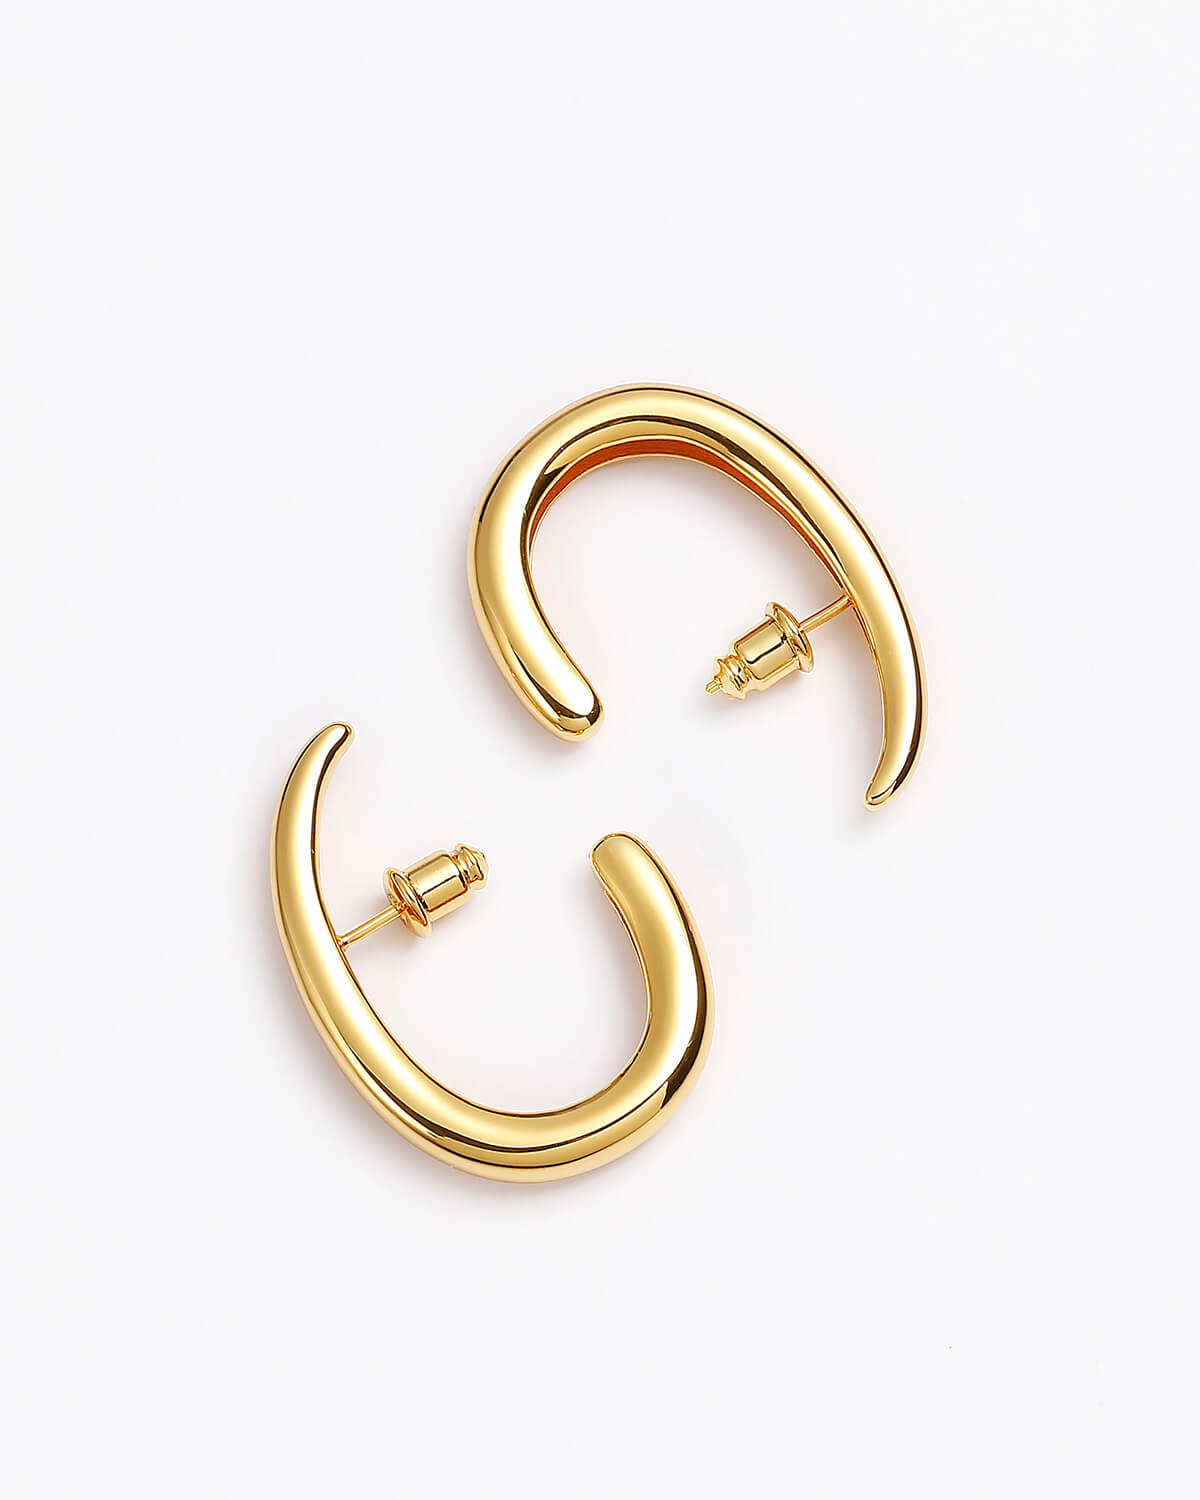 Find Your Perfect Match: Trendy Hoops Earrings for Every Style